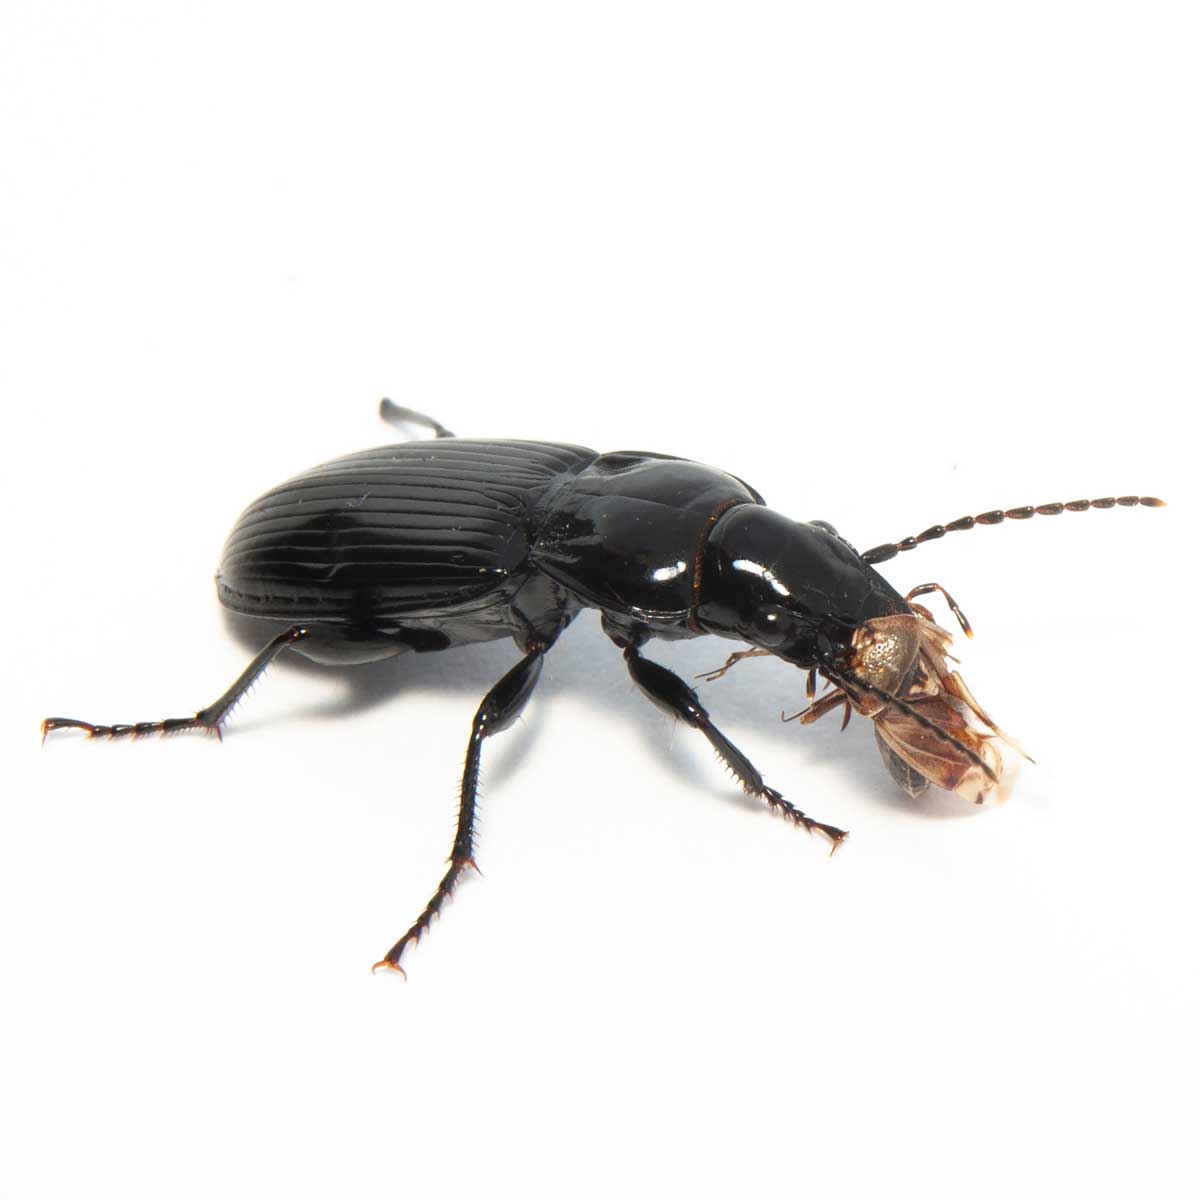 The ground beetle appears quite monstrous in size. Its cuticle is reflects the light from my flash like plastic.